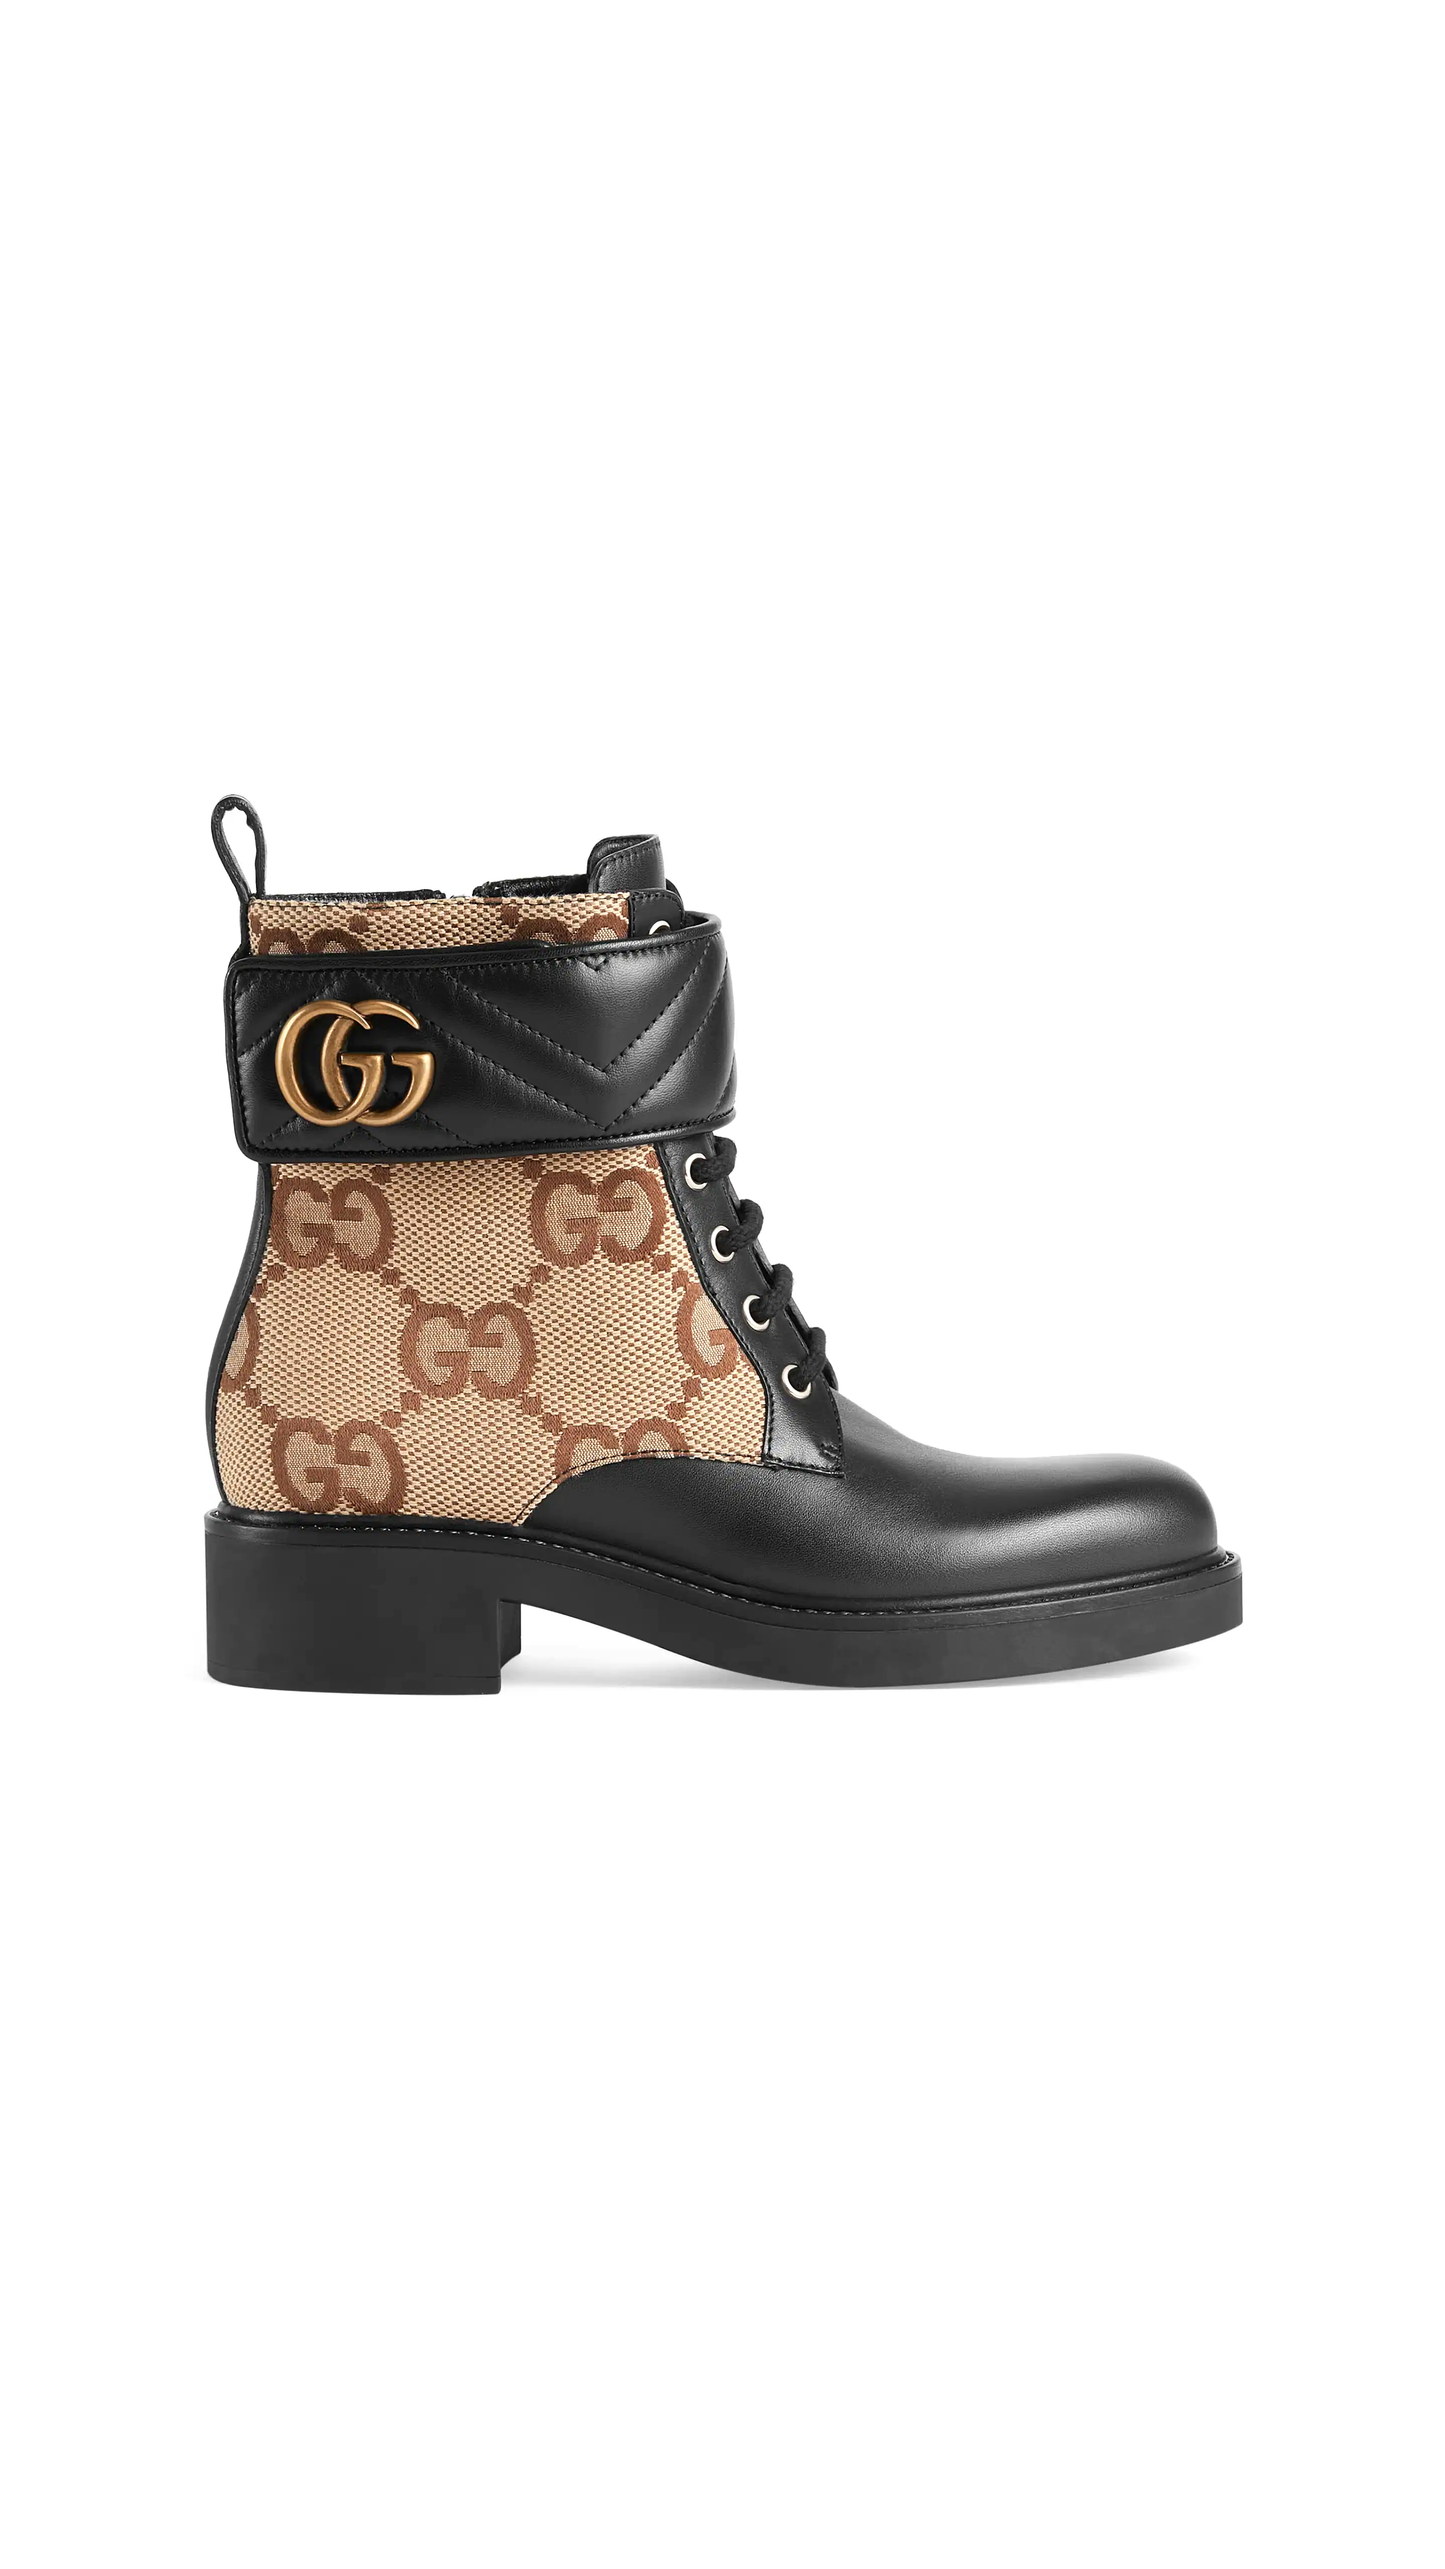 Ankle Boot with Double G - Black / Beige / Ebony